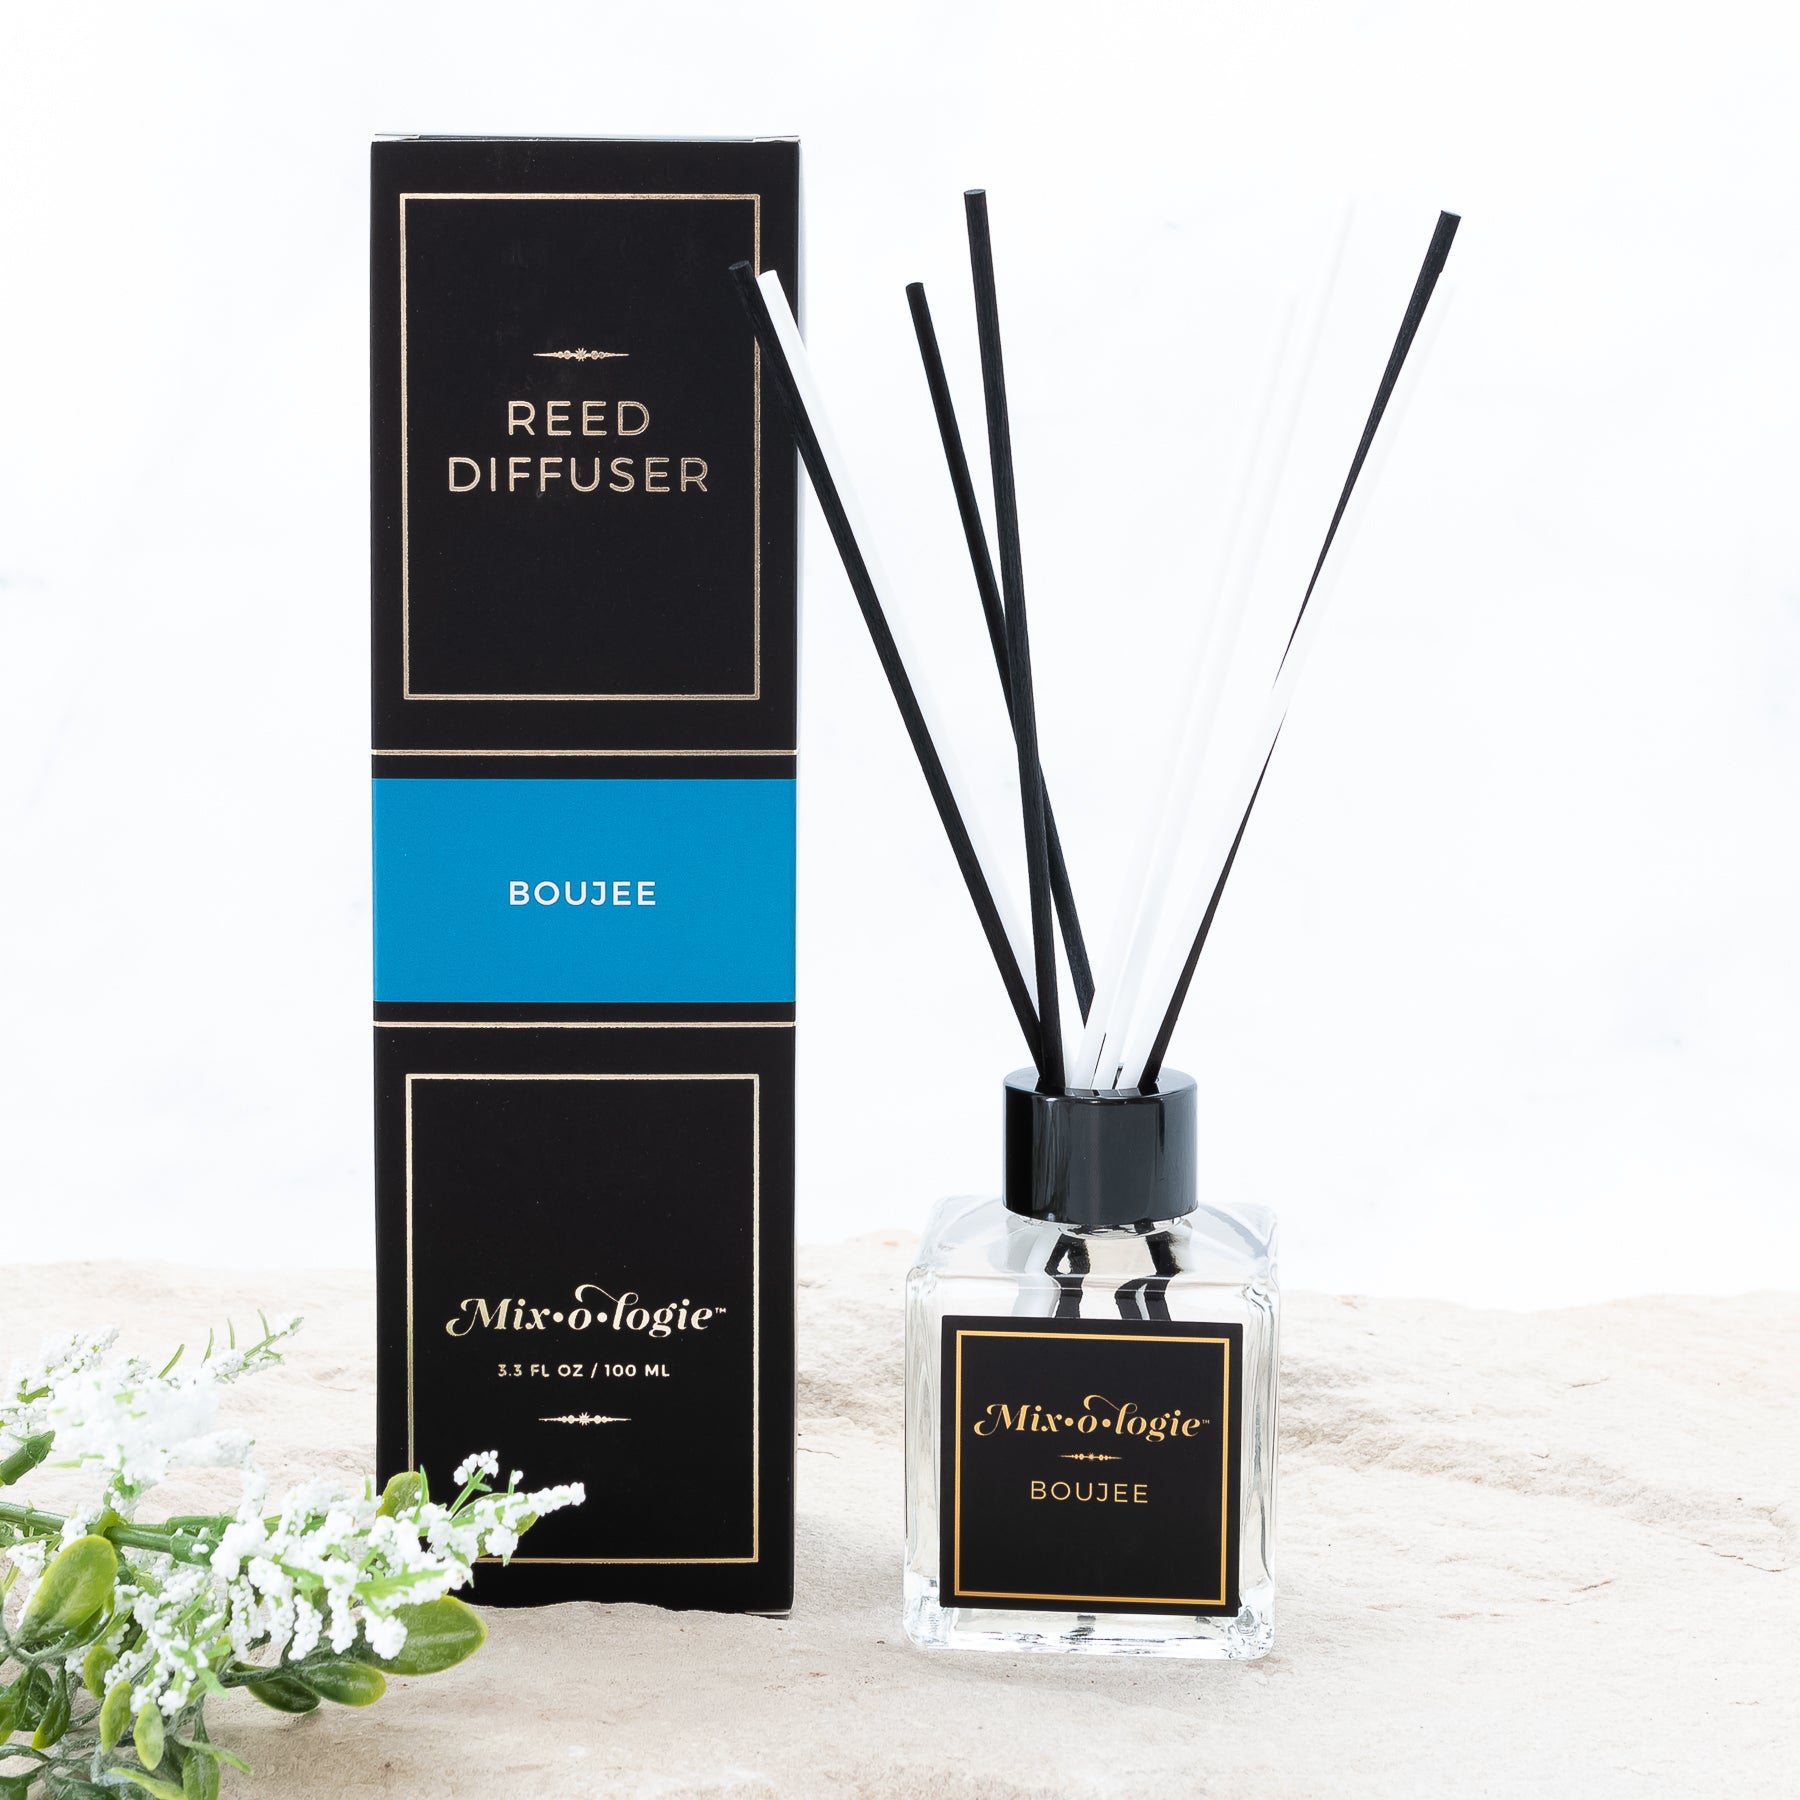 Mixologie Boujee scented Reed Diffuser with 8 reed diffuser sticks in 3.5 FL OZ glass bottle. 